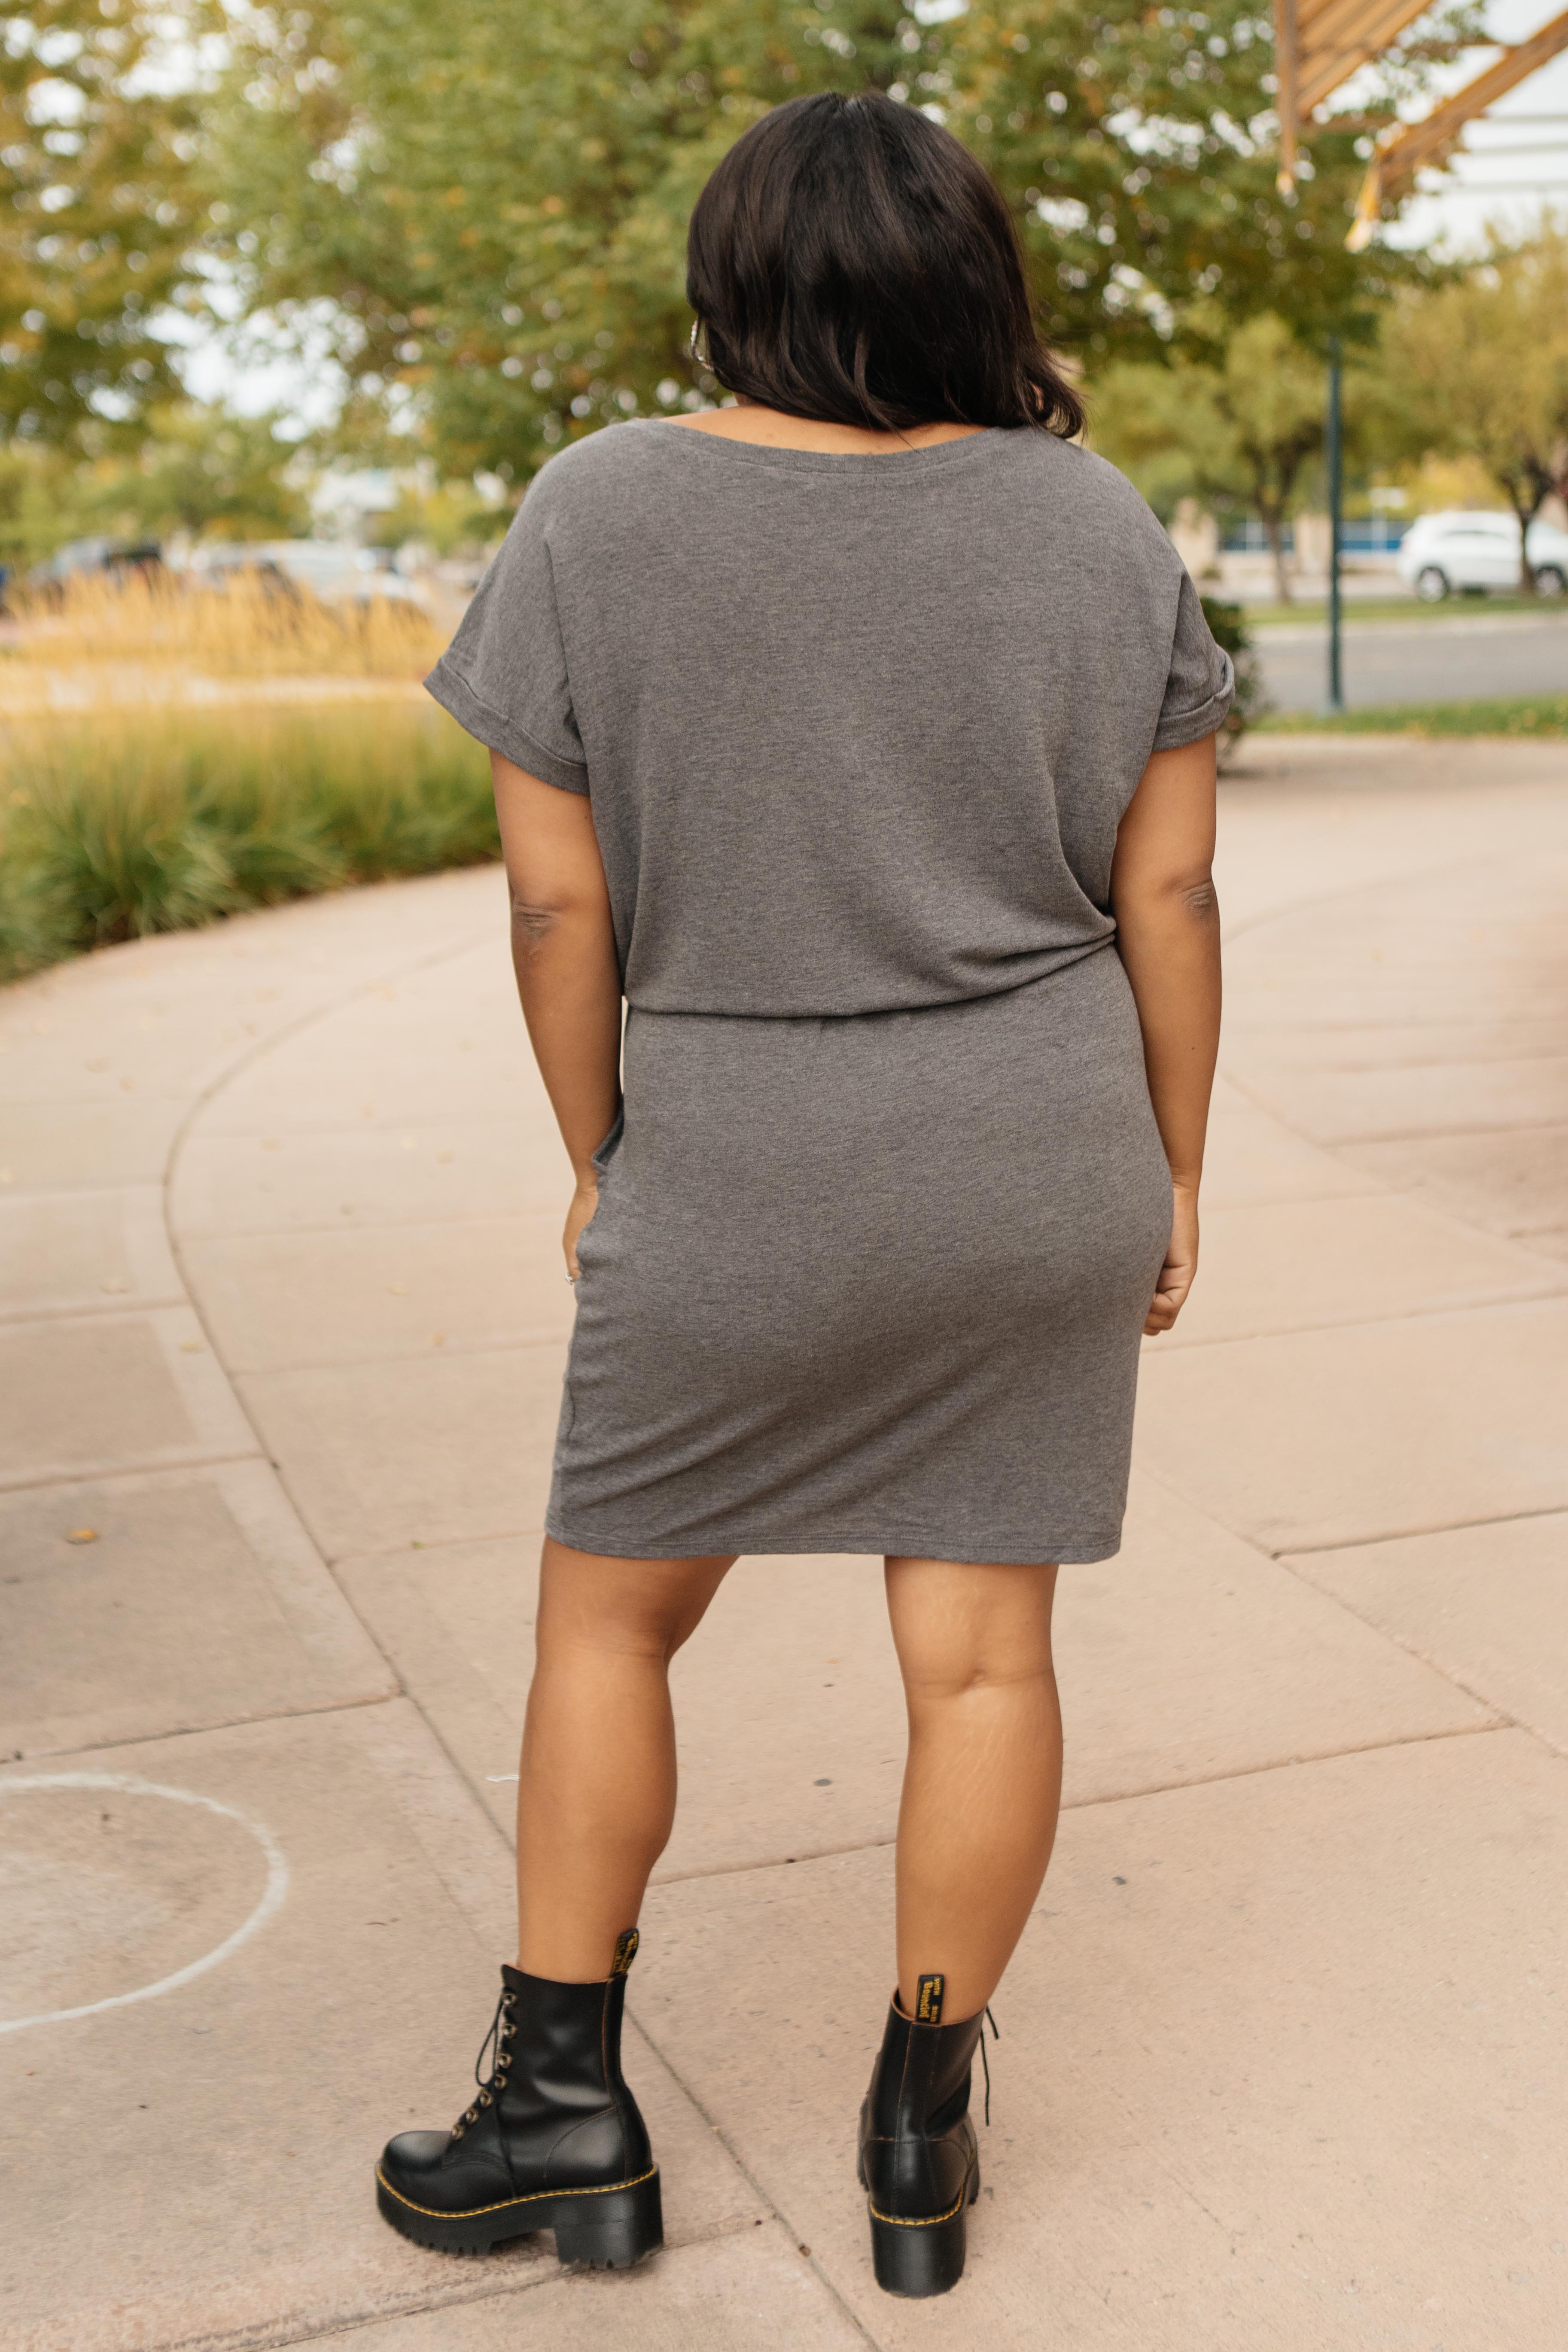 The Day Out Dress in Charcoal